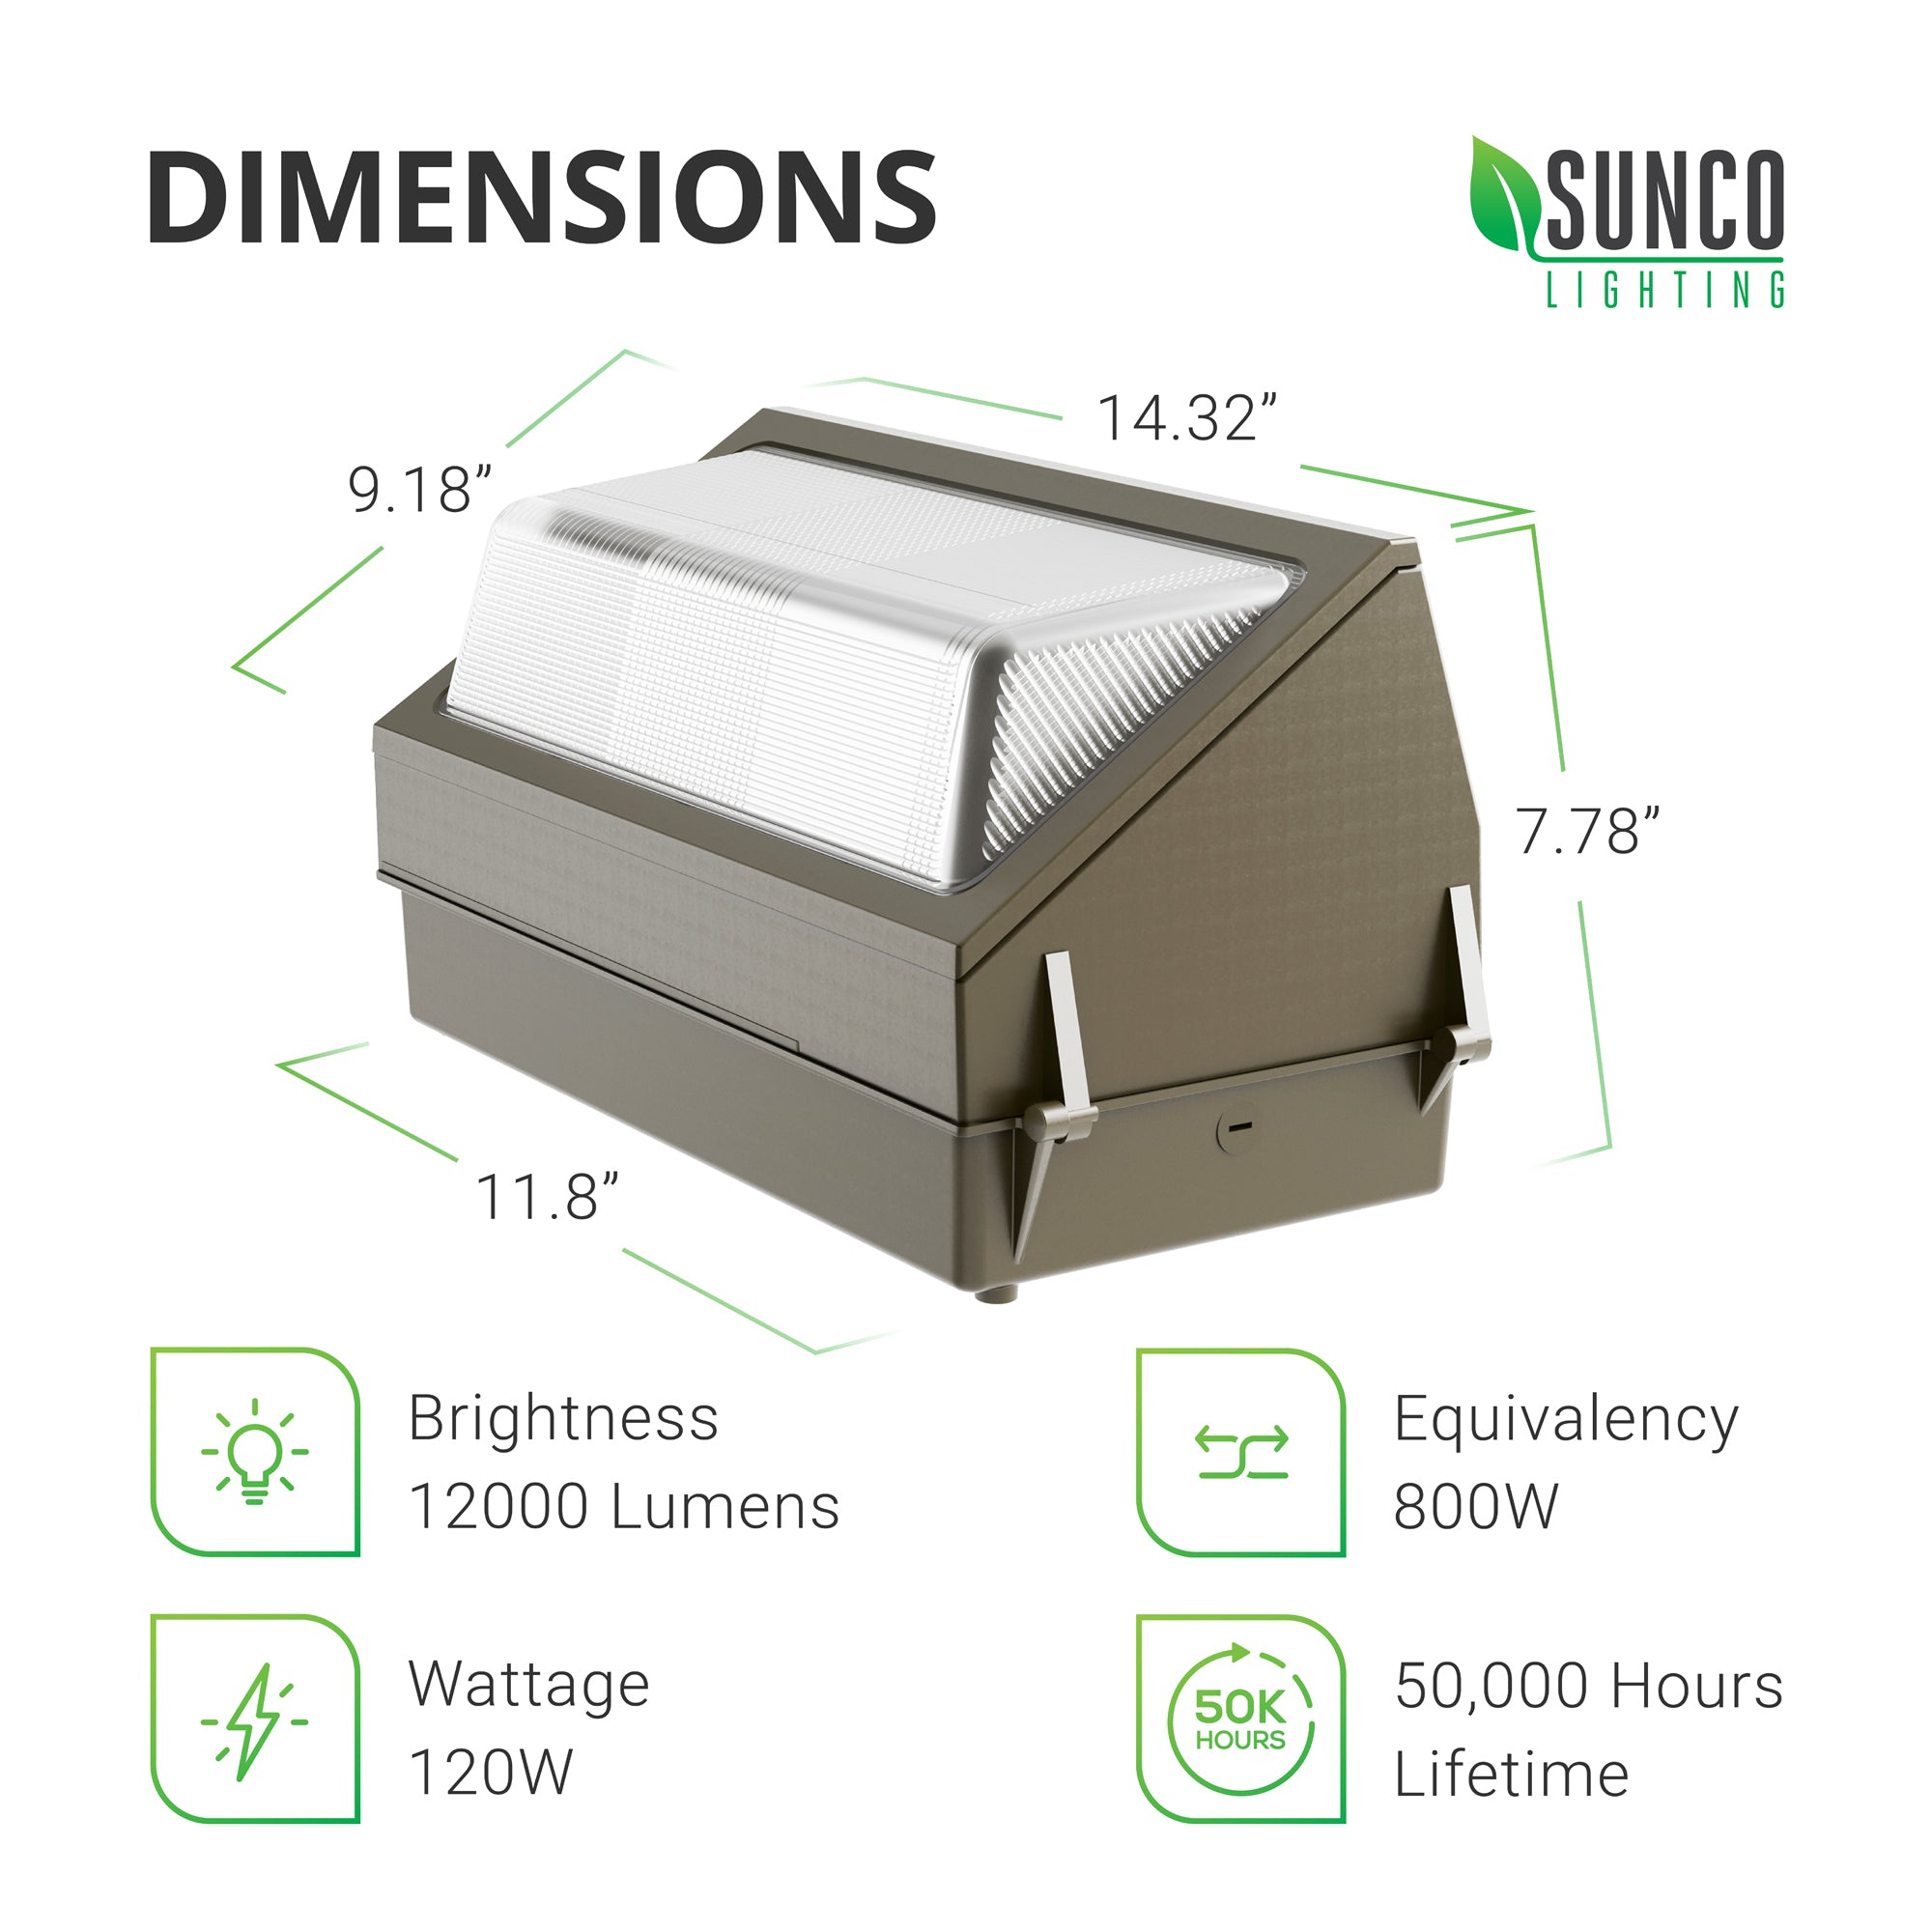 Dimensions of the 120W LED Wall Pack from Sunco Lighting. Base Length: 11.8-inches, Fixture Height: 9.18-inches, Depth: 9.18-inches, and Fixture Top Length: 14.32-inches. The durable light fixture is airtight and IP65 rated for exterior use. It offers 12000 lumens of instant on and flicker free light. 120W=800W. With a 50,000 hour lifespan and an integrated LED with no ballast, it will reduce maintenance costs and time compared to high wattage light fixtures.